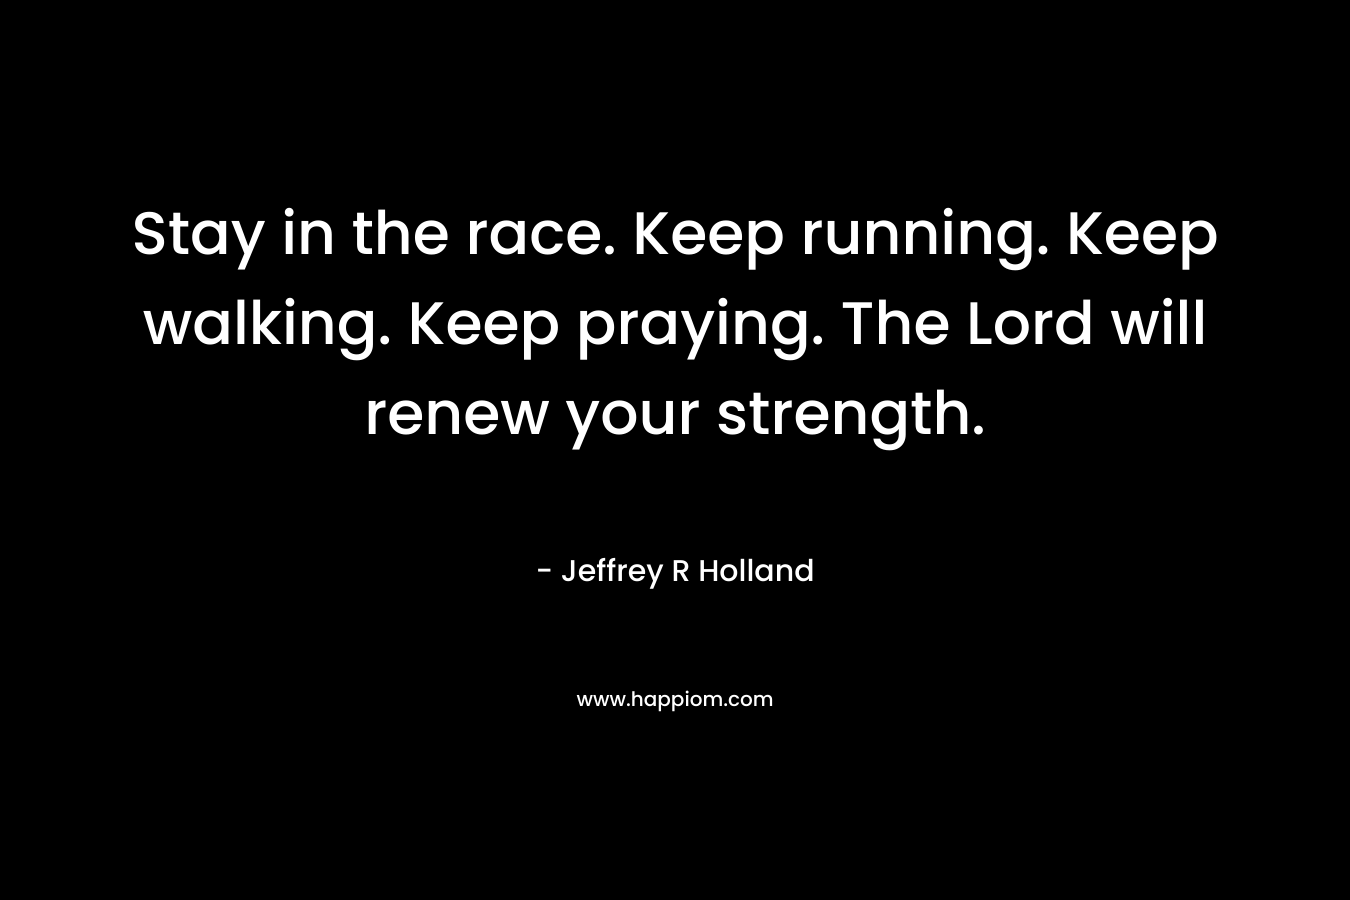 Stay in the race. Keep running. Keep walking. Keep praying. The Lord will renew your strength.